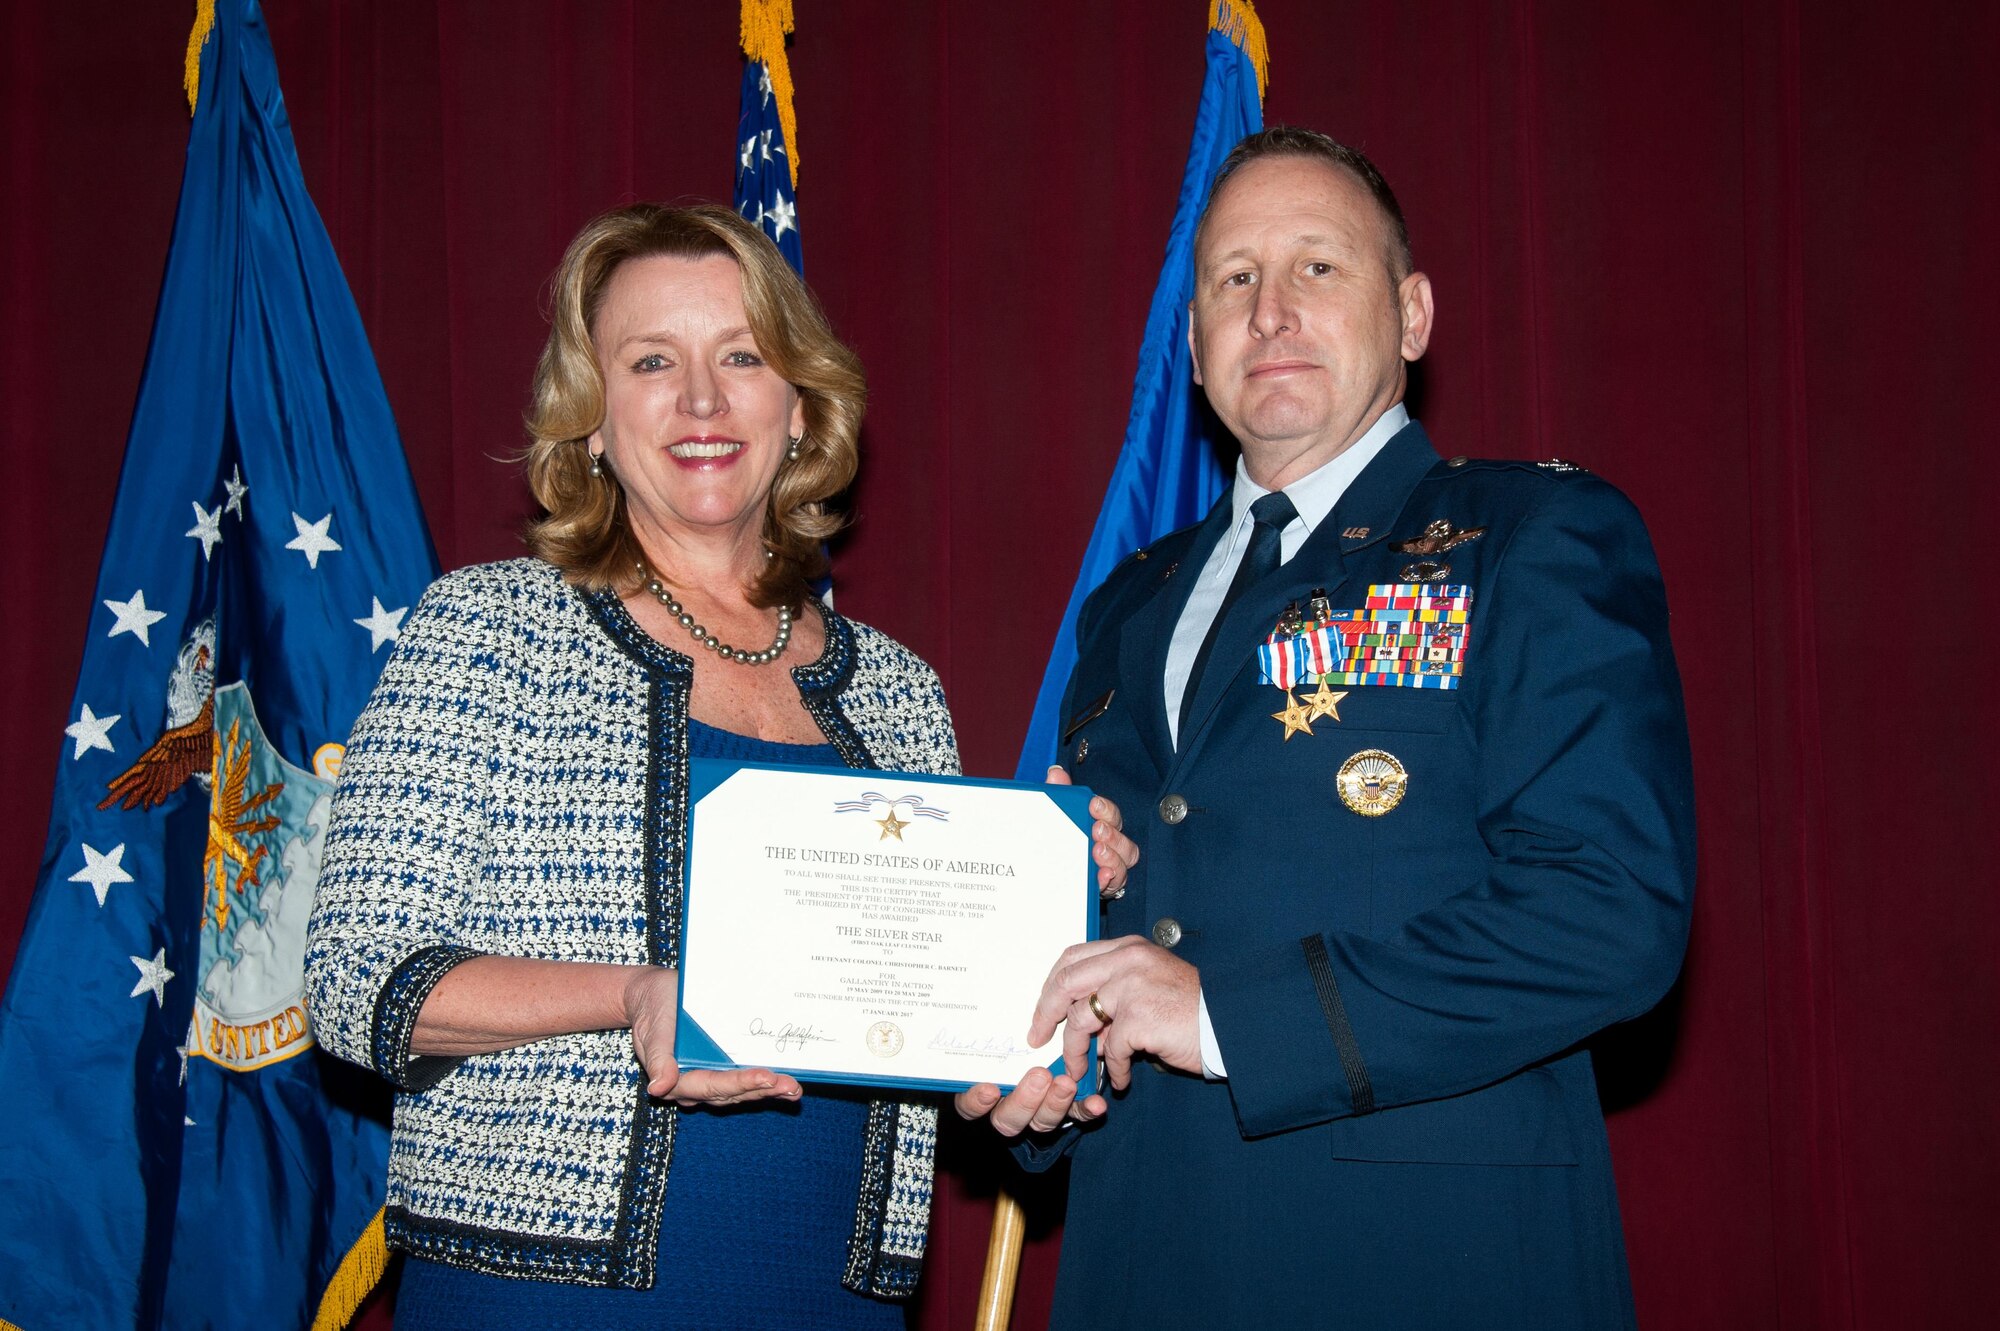 The Honorable Deborah Lee James, 23rd Secretary of the Air Force, arrives at Maxwell to present Air War College faculty member Colonel Christopher C. Barnett the Silver Star and the Silver Star first oak leaf cluster, Jan. 19, 2017. Secretary James chose her last day to honor Barnett for his gallantry in connection with 2009 military operations against an armed enemy of the United States, as well as to announce upgraded medals awarded to seven additional Airmen. (US Air Force photo by Melanie Rodgers Cox)

